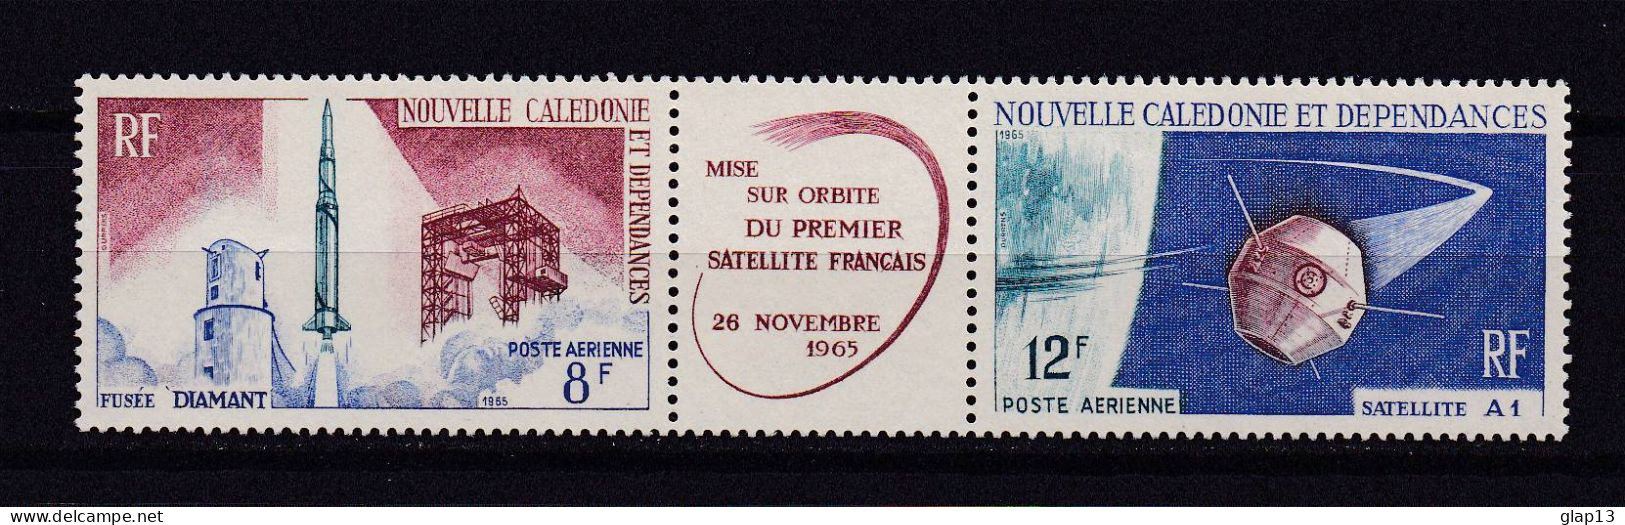 NOUVELLE-CALEDONIE 1966 PA N°85A NEUF AVEC CHARNIERE SATELLITE - Unused Stamps